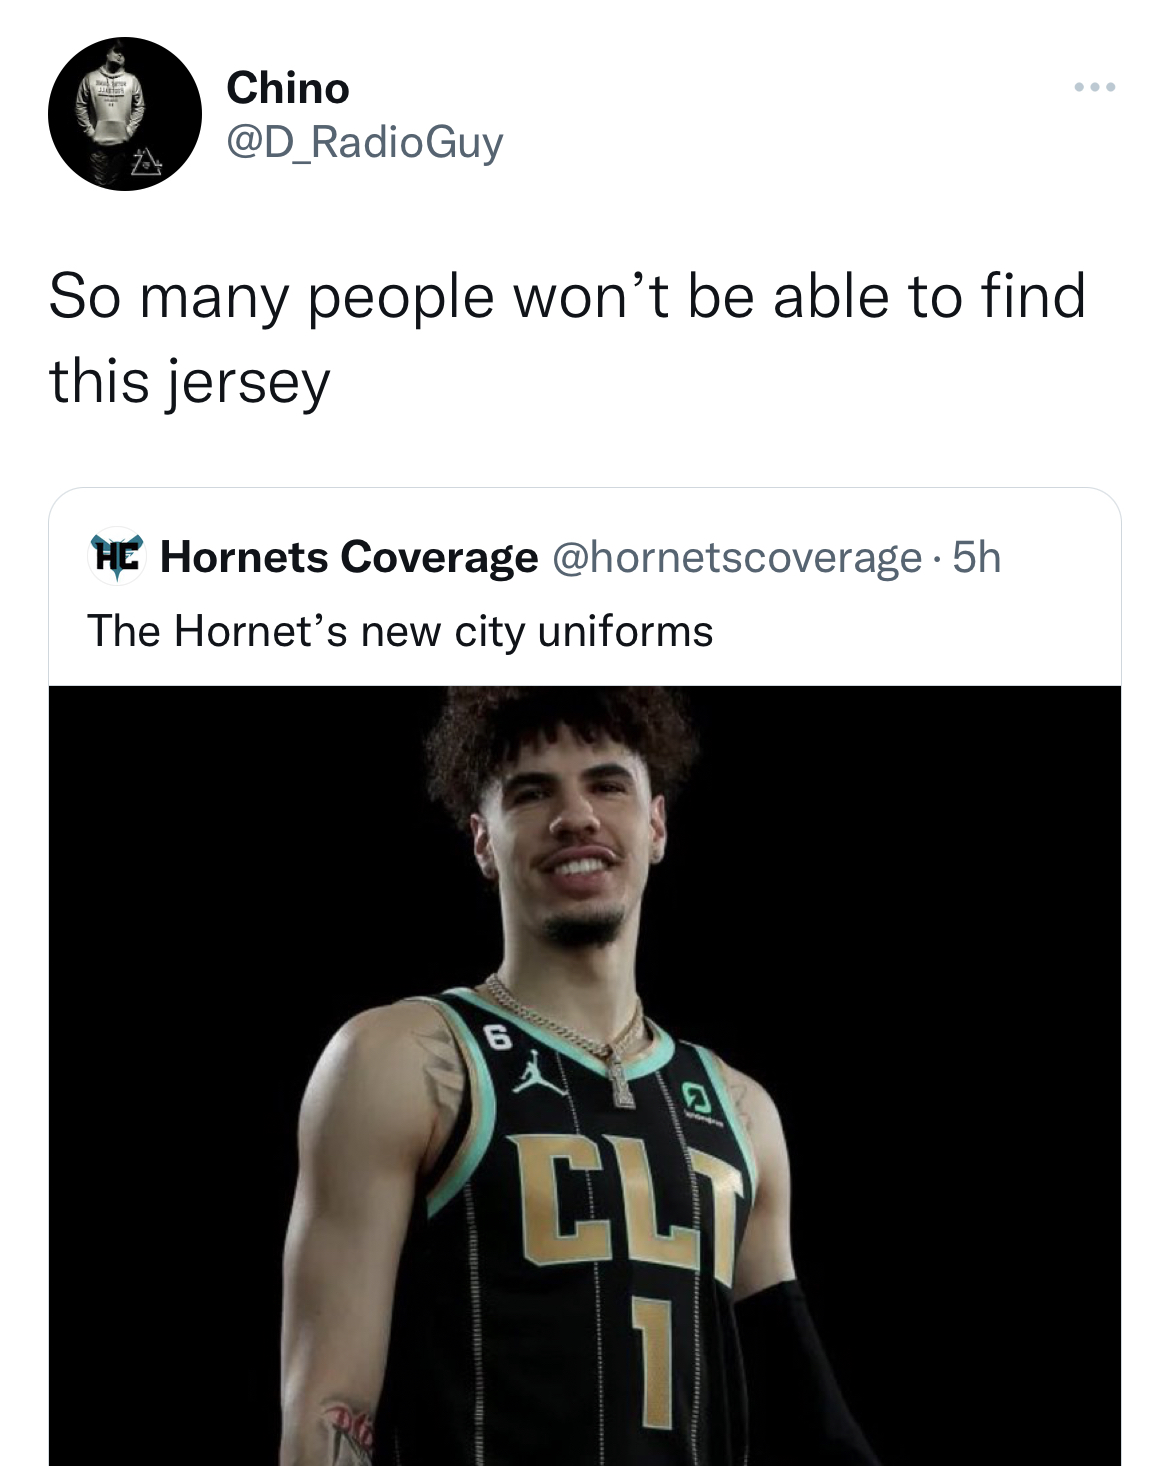 Tweets roasting celebs - shoulder - Chino So many people won't be able to find this jersey He Hornets Coverage . 5h The Hornet's new city uniforms 2 Cli